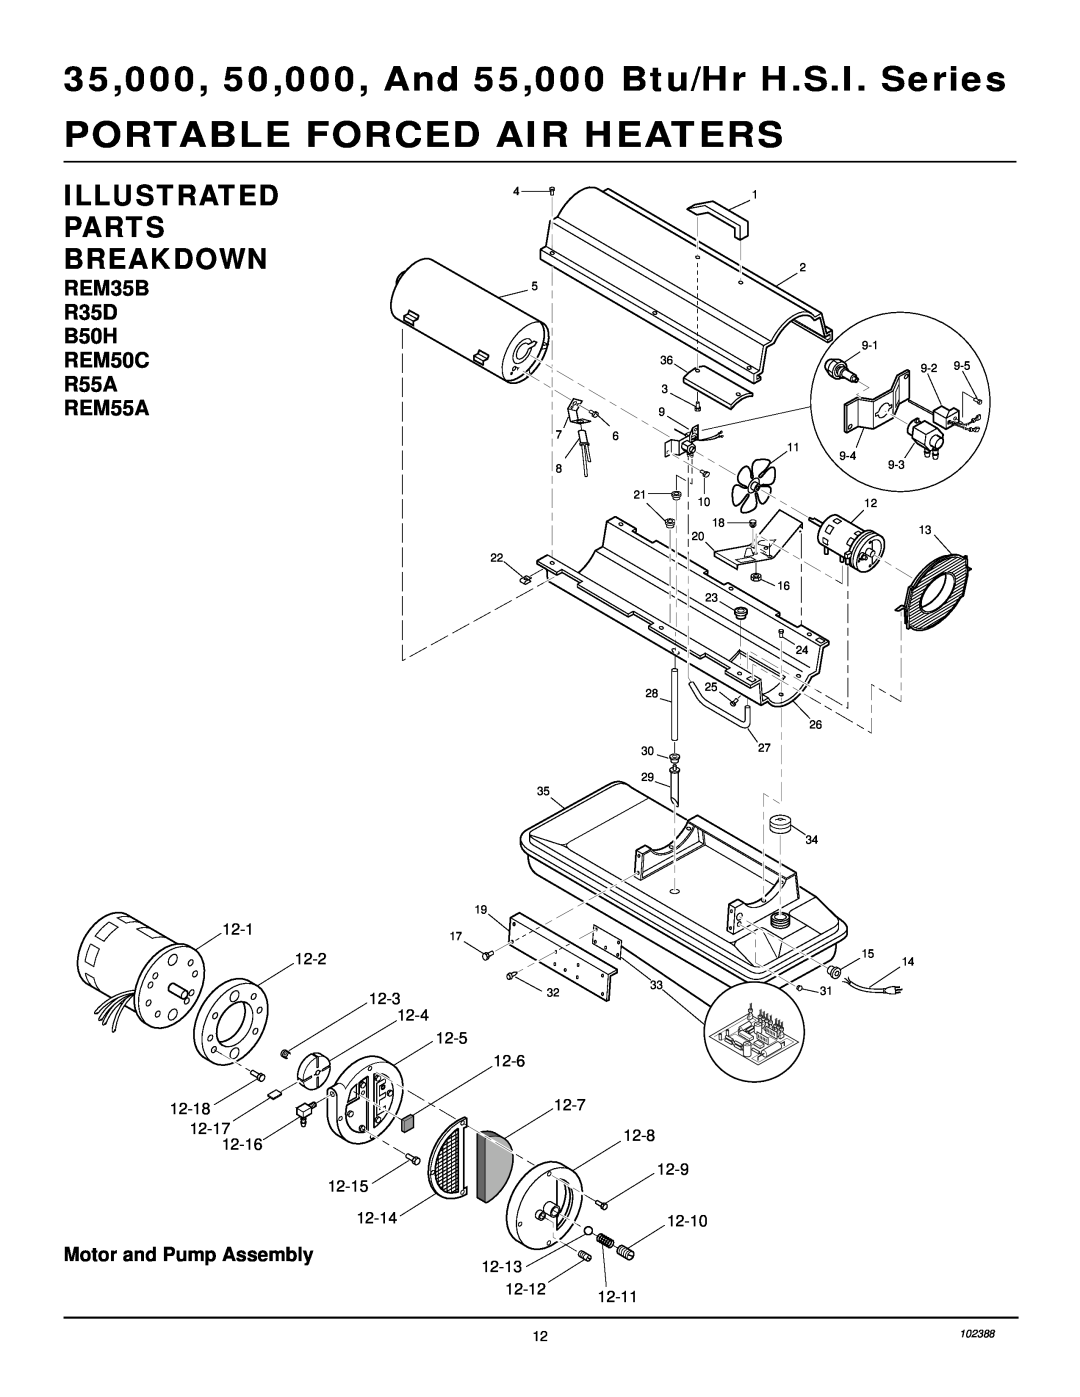 Desa and 55 owner manual Illustrated Parts Breakdown, REM35B R35D B50H REM50C R55A REM55A, Motor and Pump Assembly 